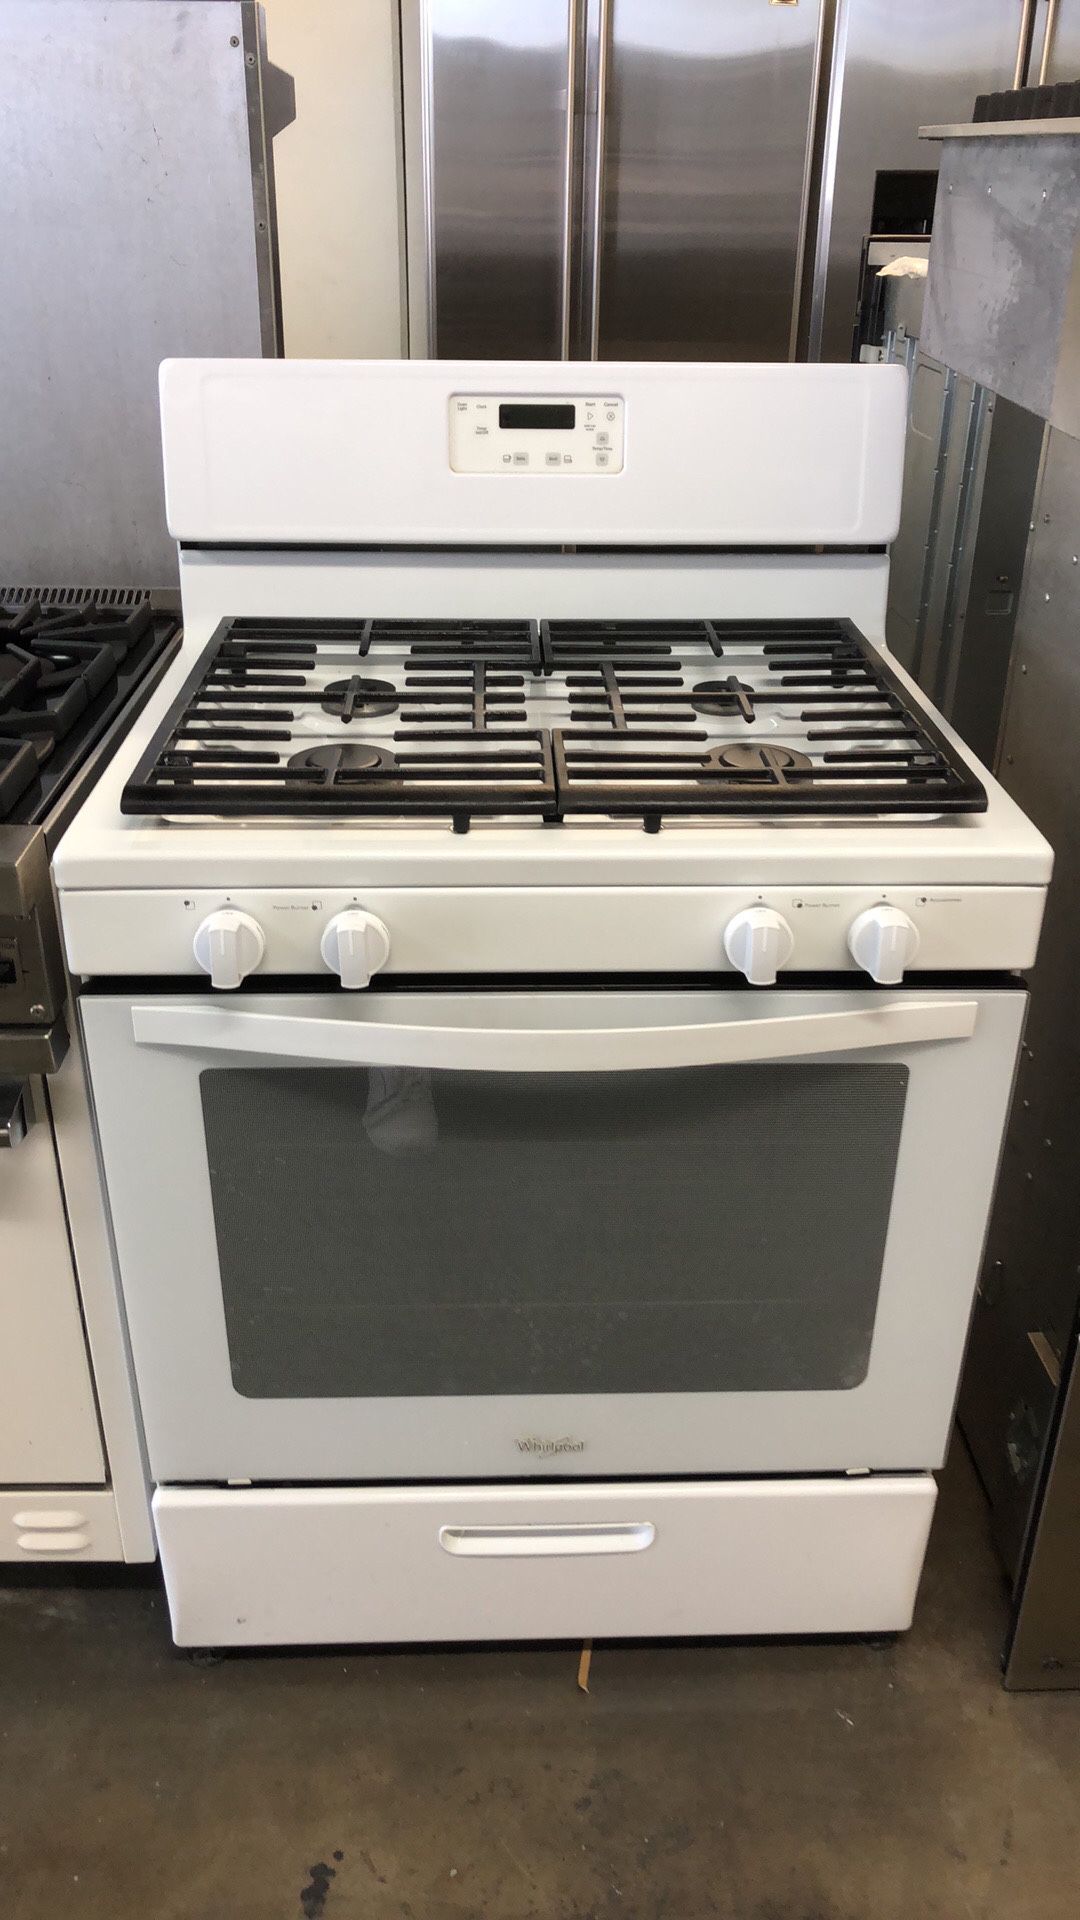 Whirlpool 30”Wide All Gas Range Stove With Heavy Duty Grates 